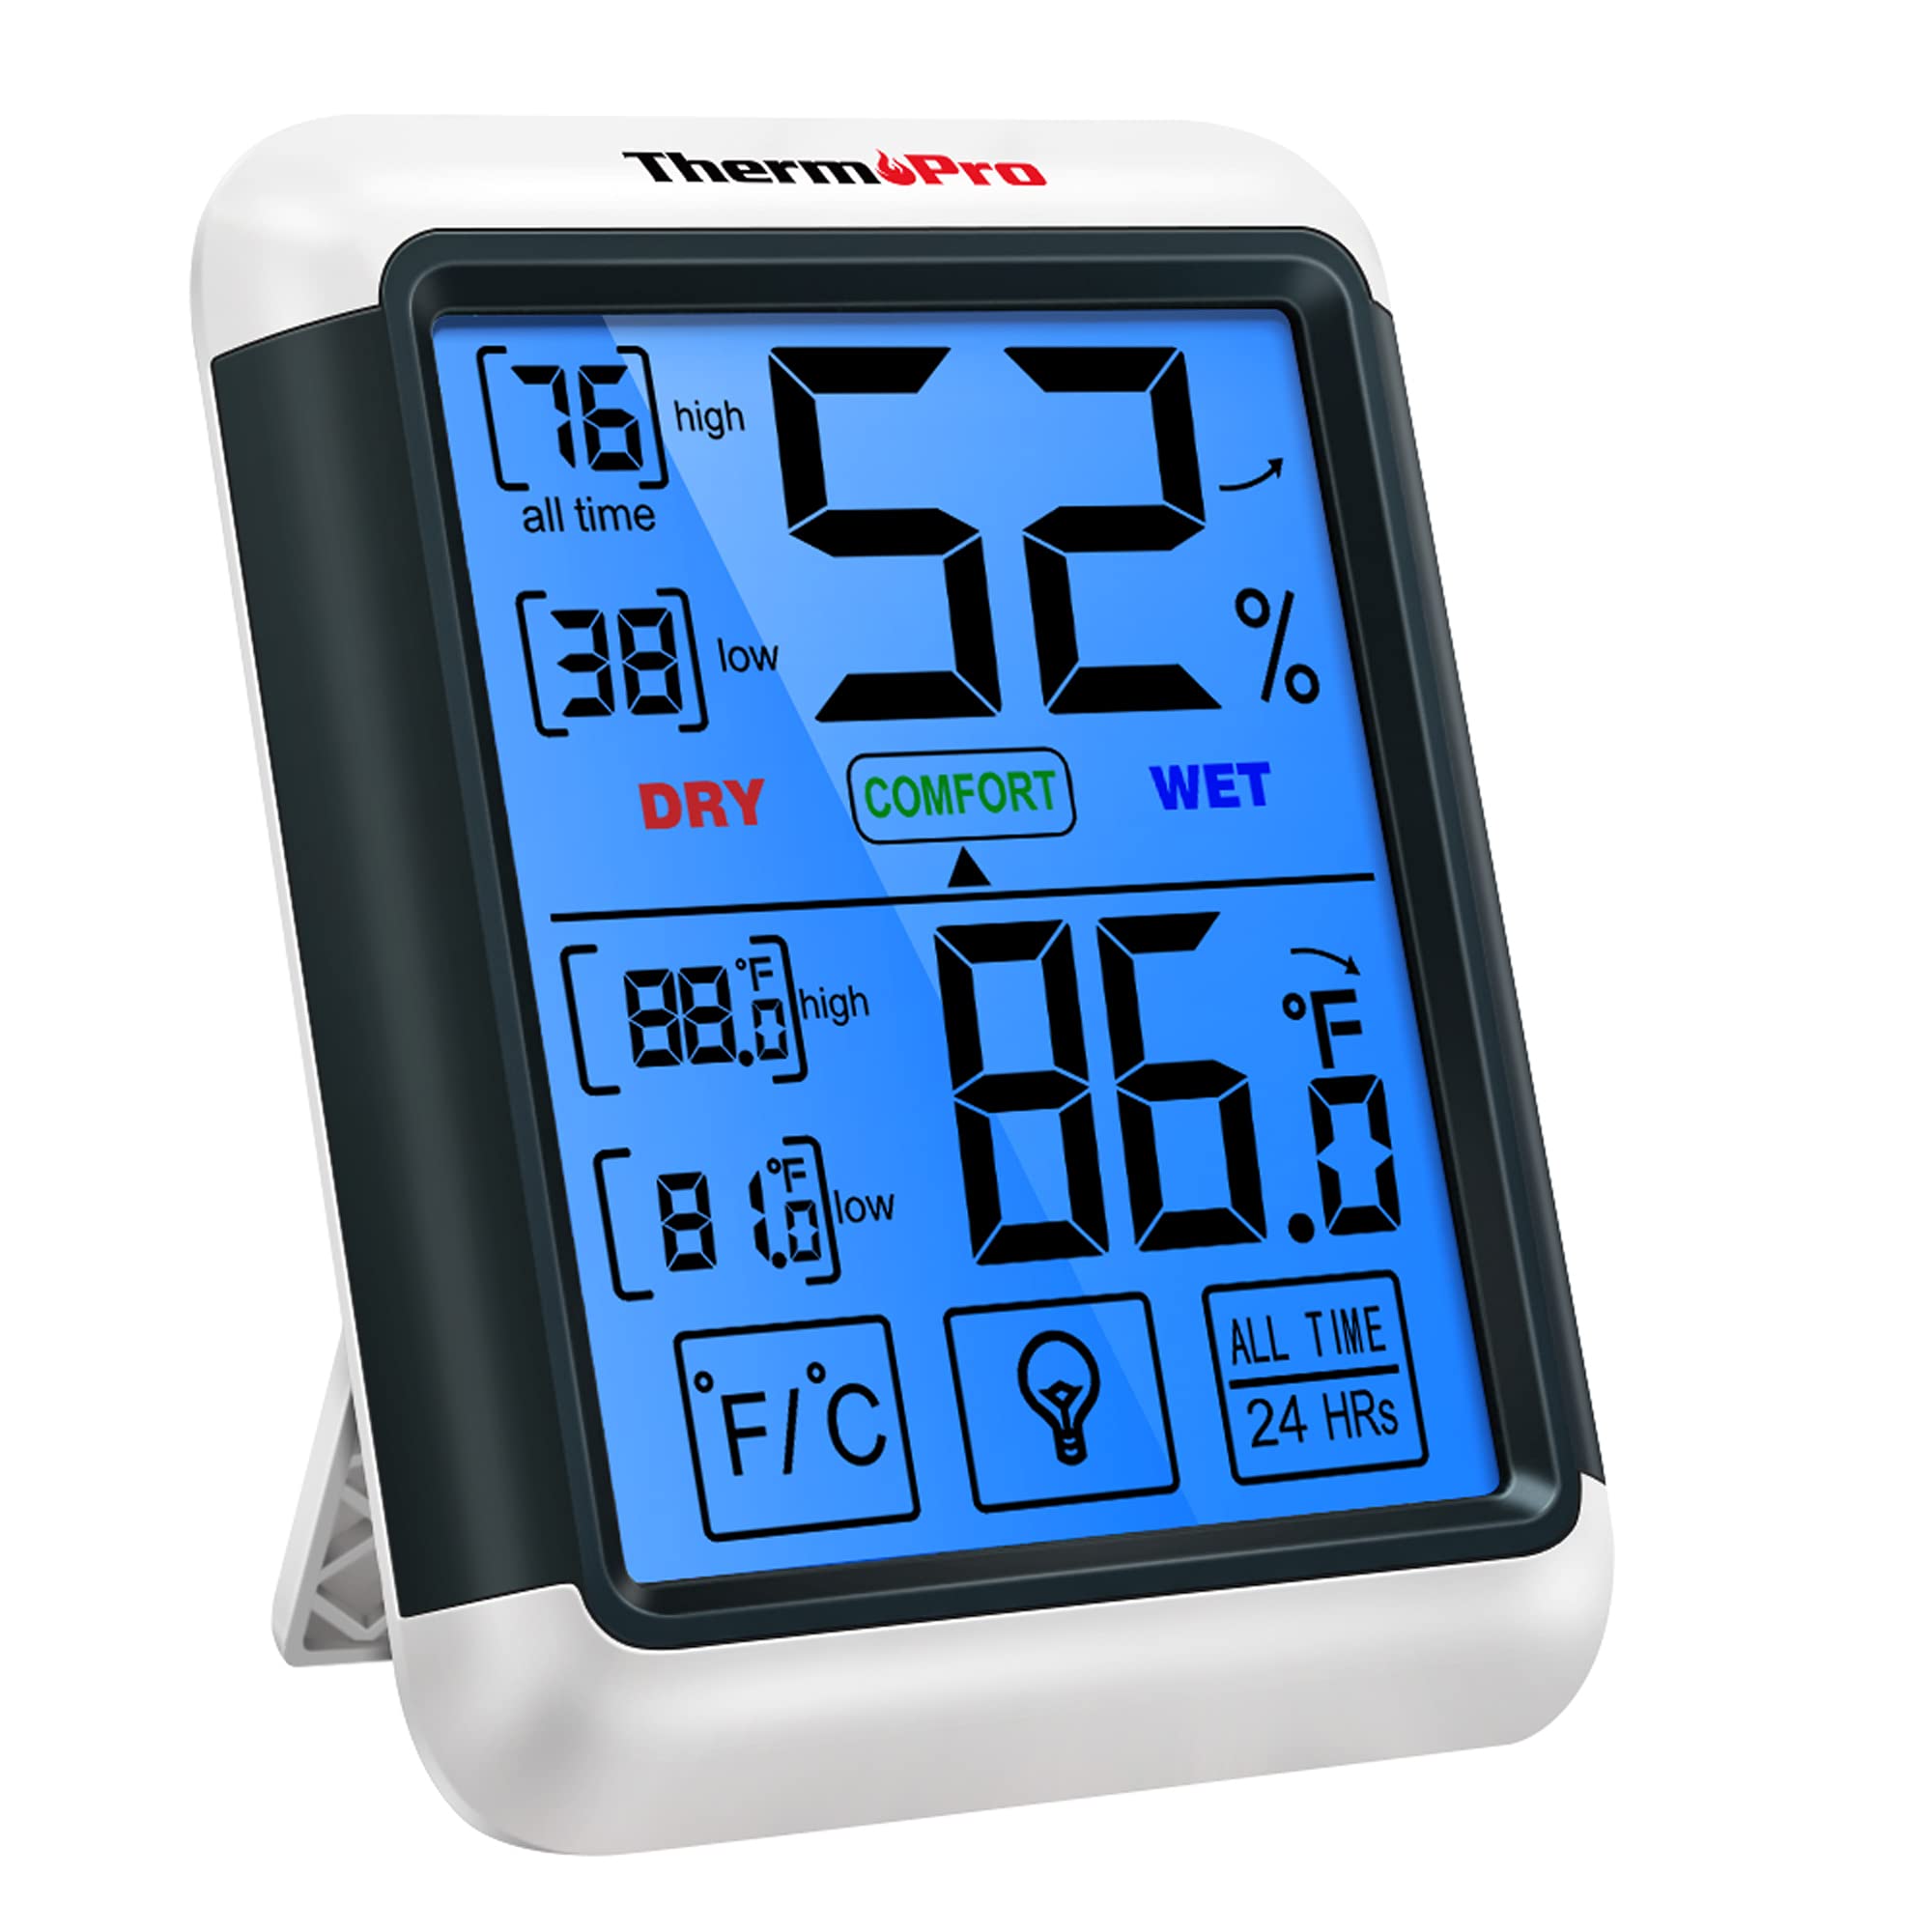 ThermoPro TP55 Digital Hygrometer Indoor Thermometer Humidity Gauge with Large Touchscreen and Backlight Temperature Humidity Monitor 1